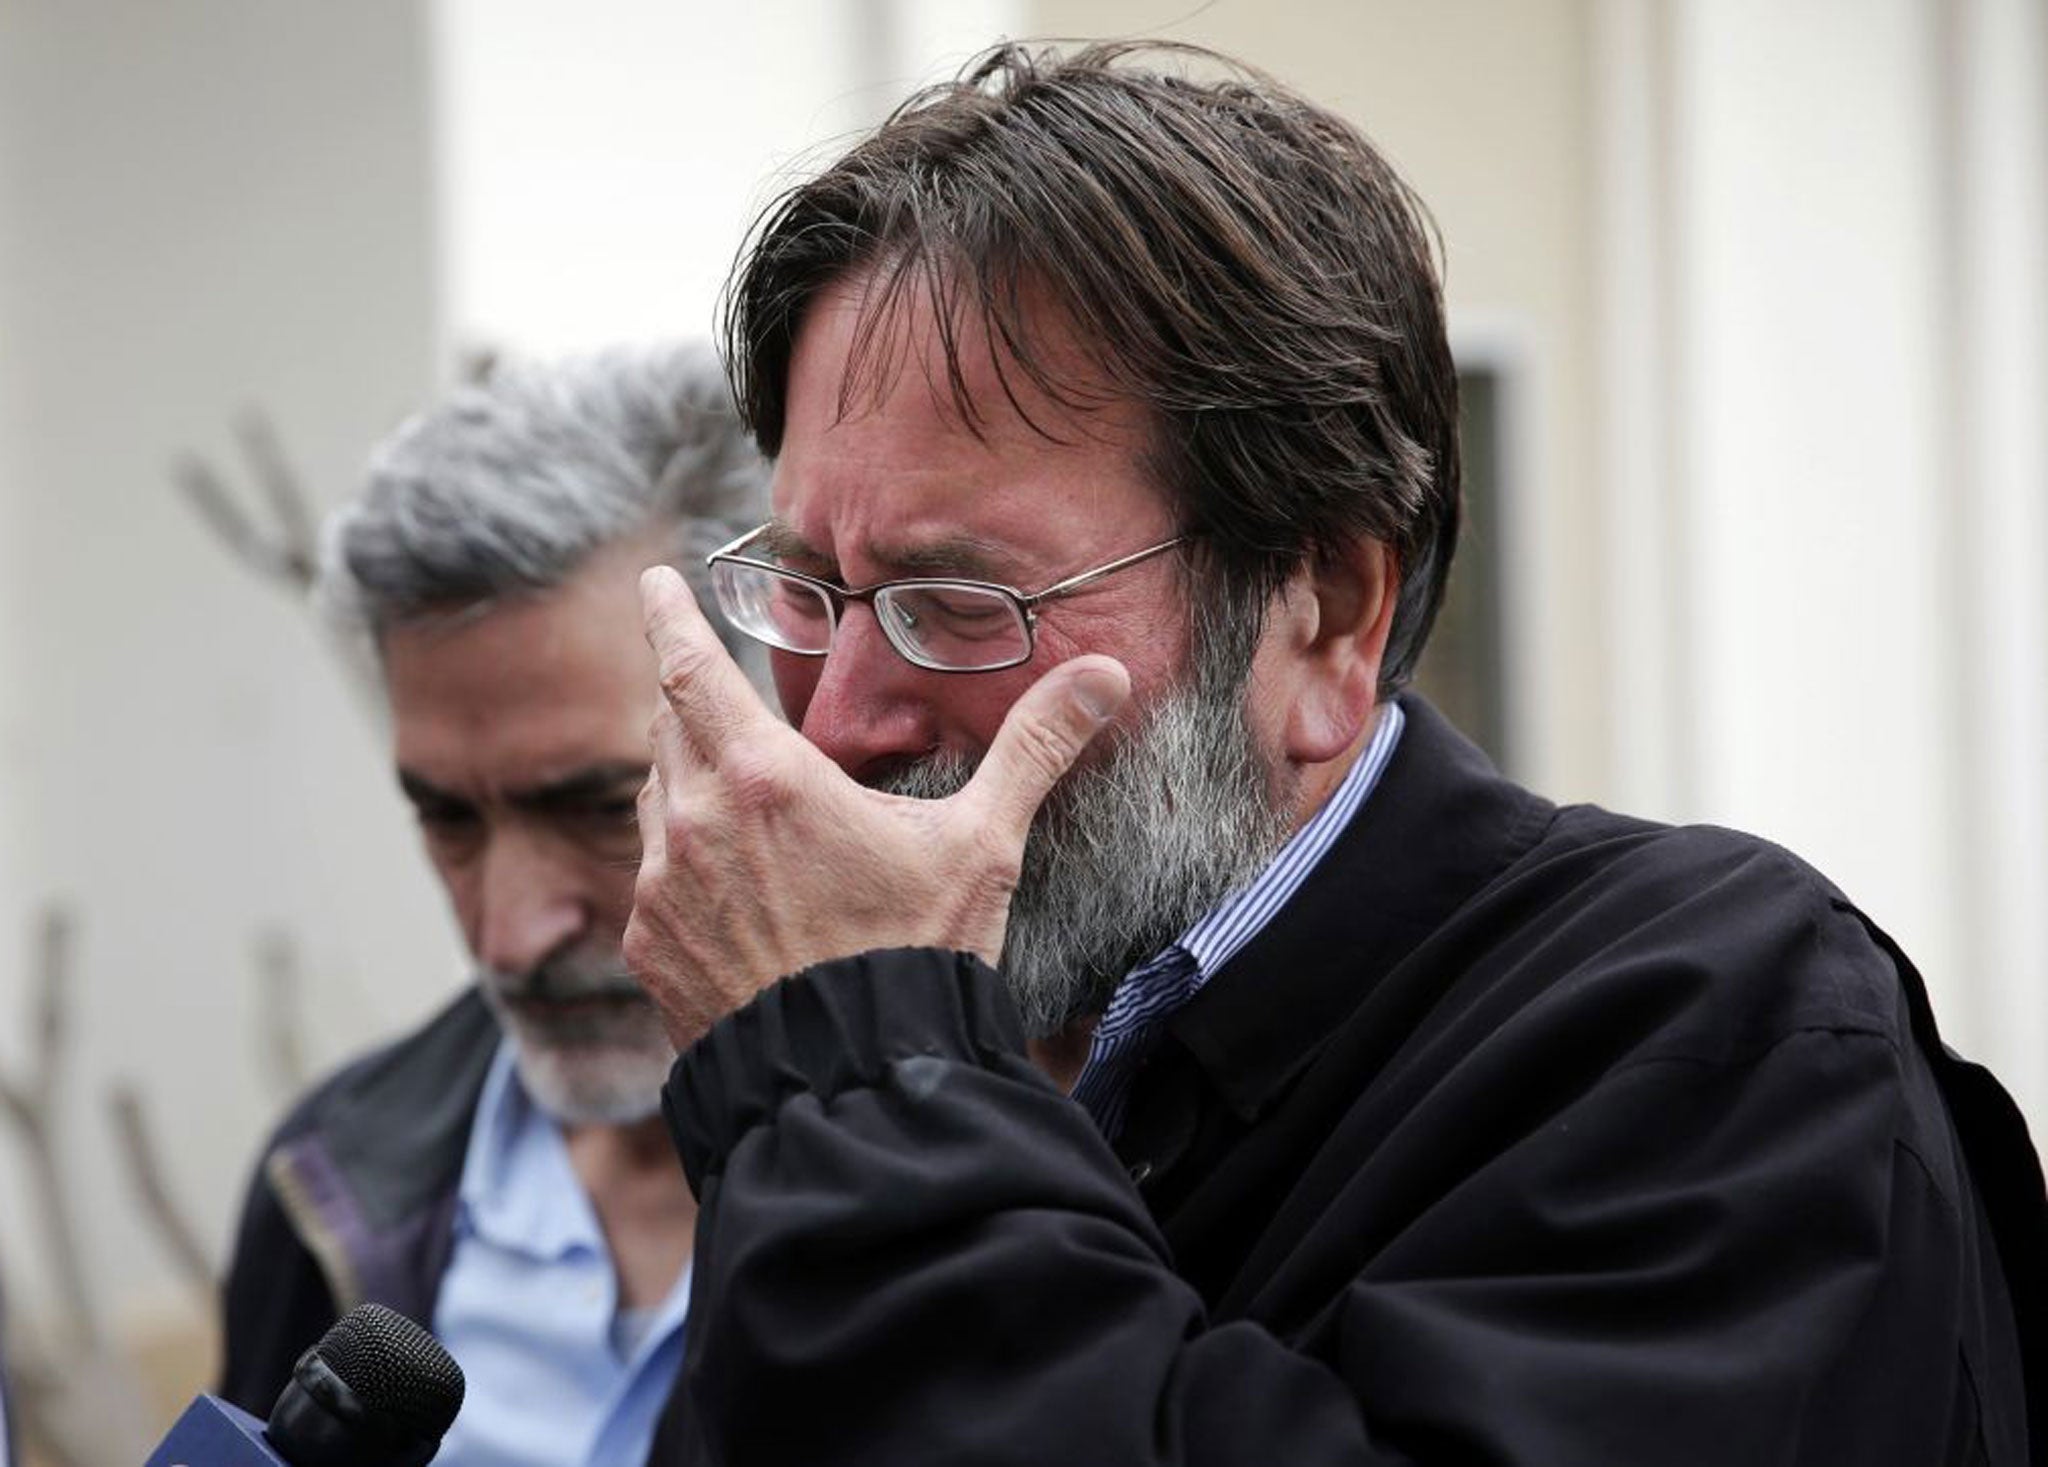 Richard Martinez who says his son Christopher Martinez was killed in Friday night's mass shooting, , breaks down as he talks to media outside the Santa Barbara County Sheriff's Headquarters on Saturday